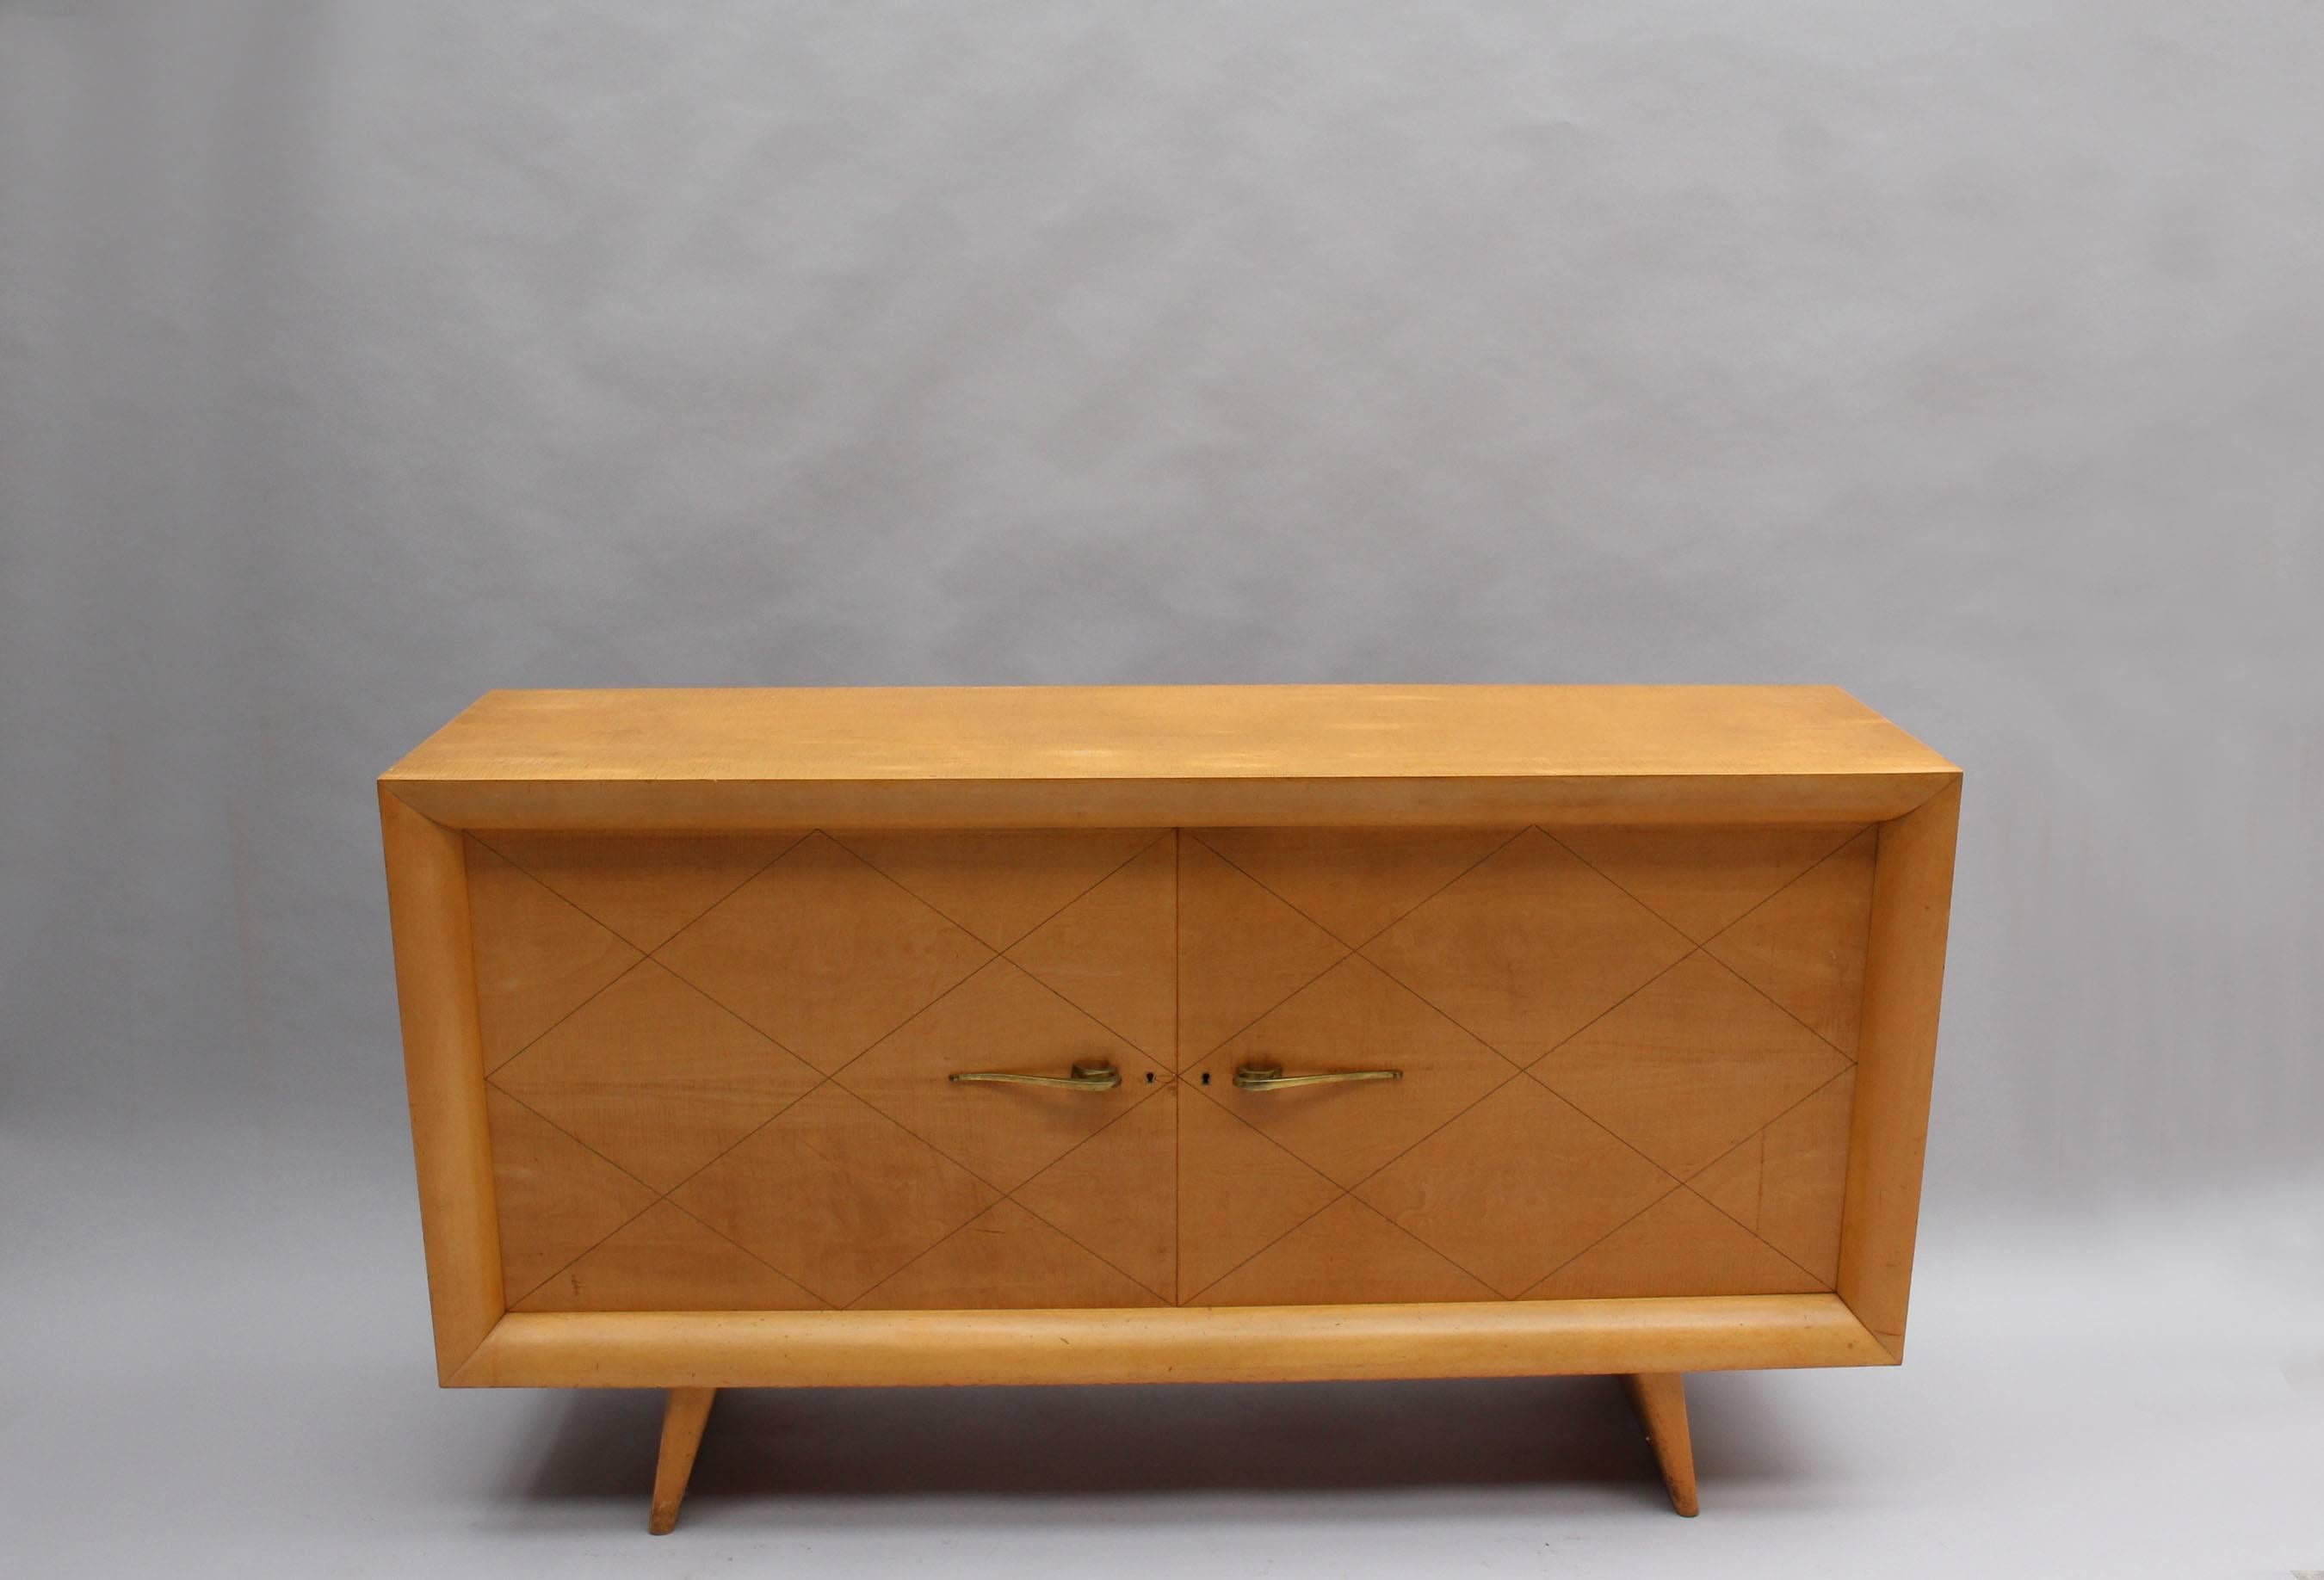 A fine French Art Deco Sycamore buffet with a diamond pattern and brass pulls on the two doors.
Two buffets are available.